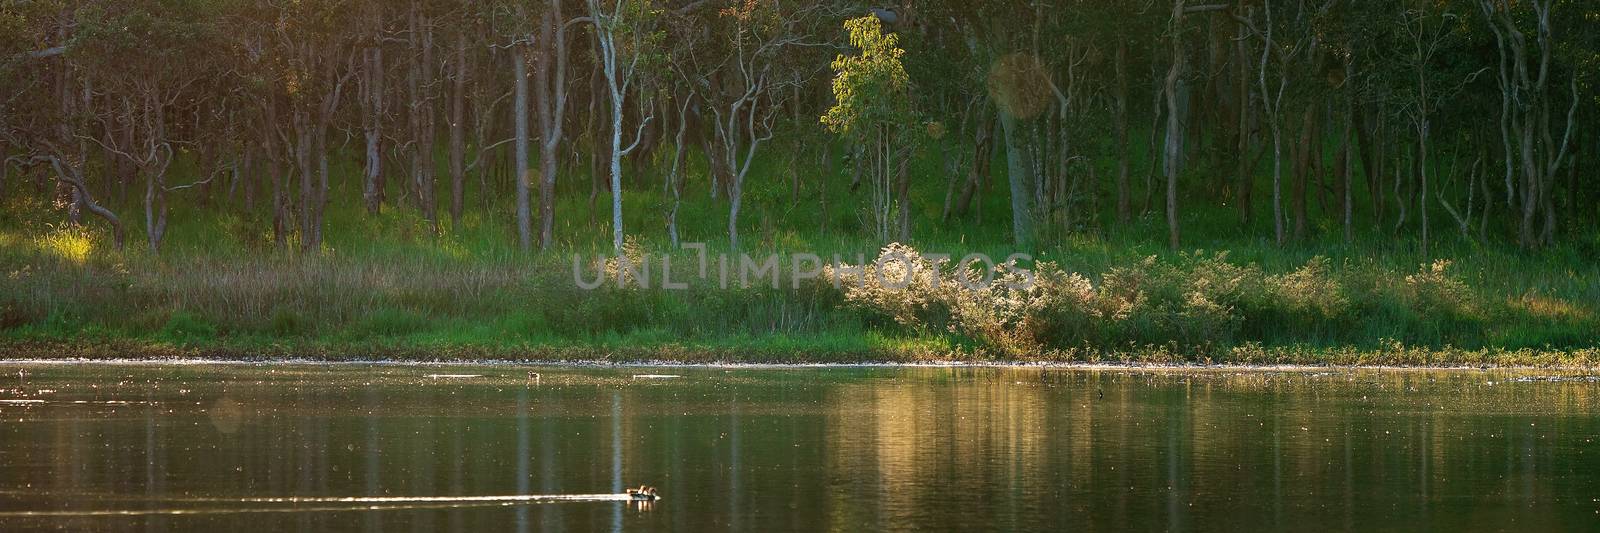 Ducks Swimming Peacefully On A Pond With A Forest Background by 	JacksonStock